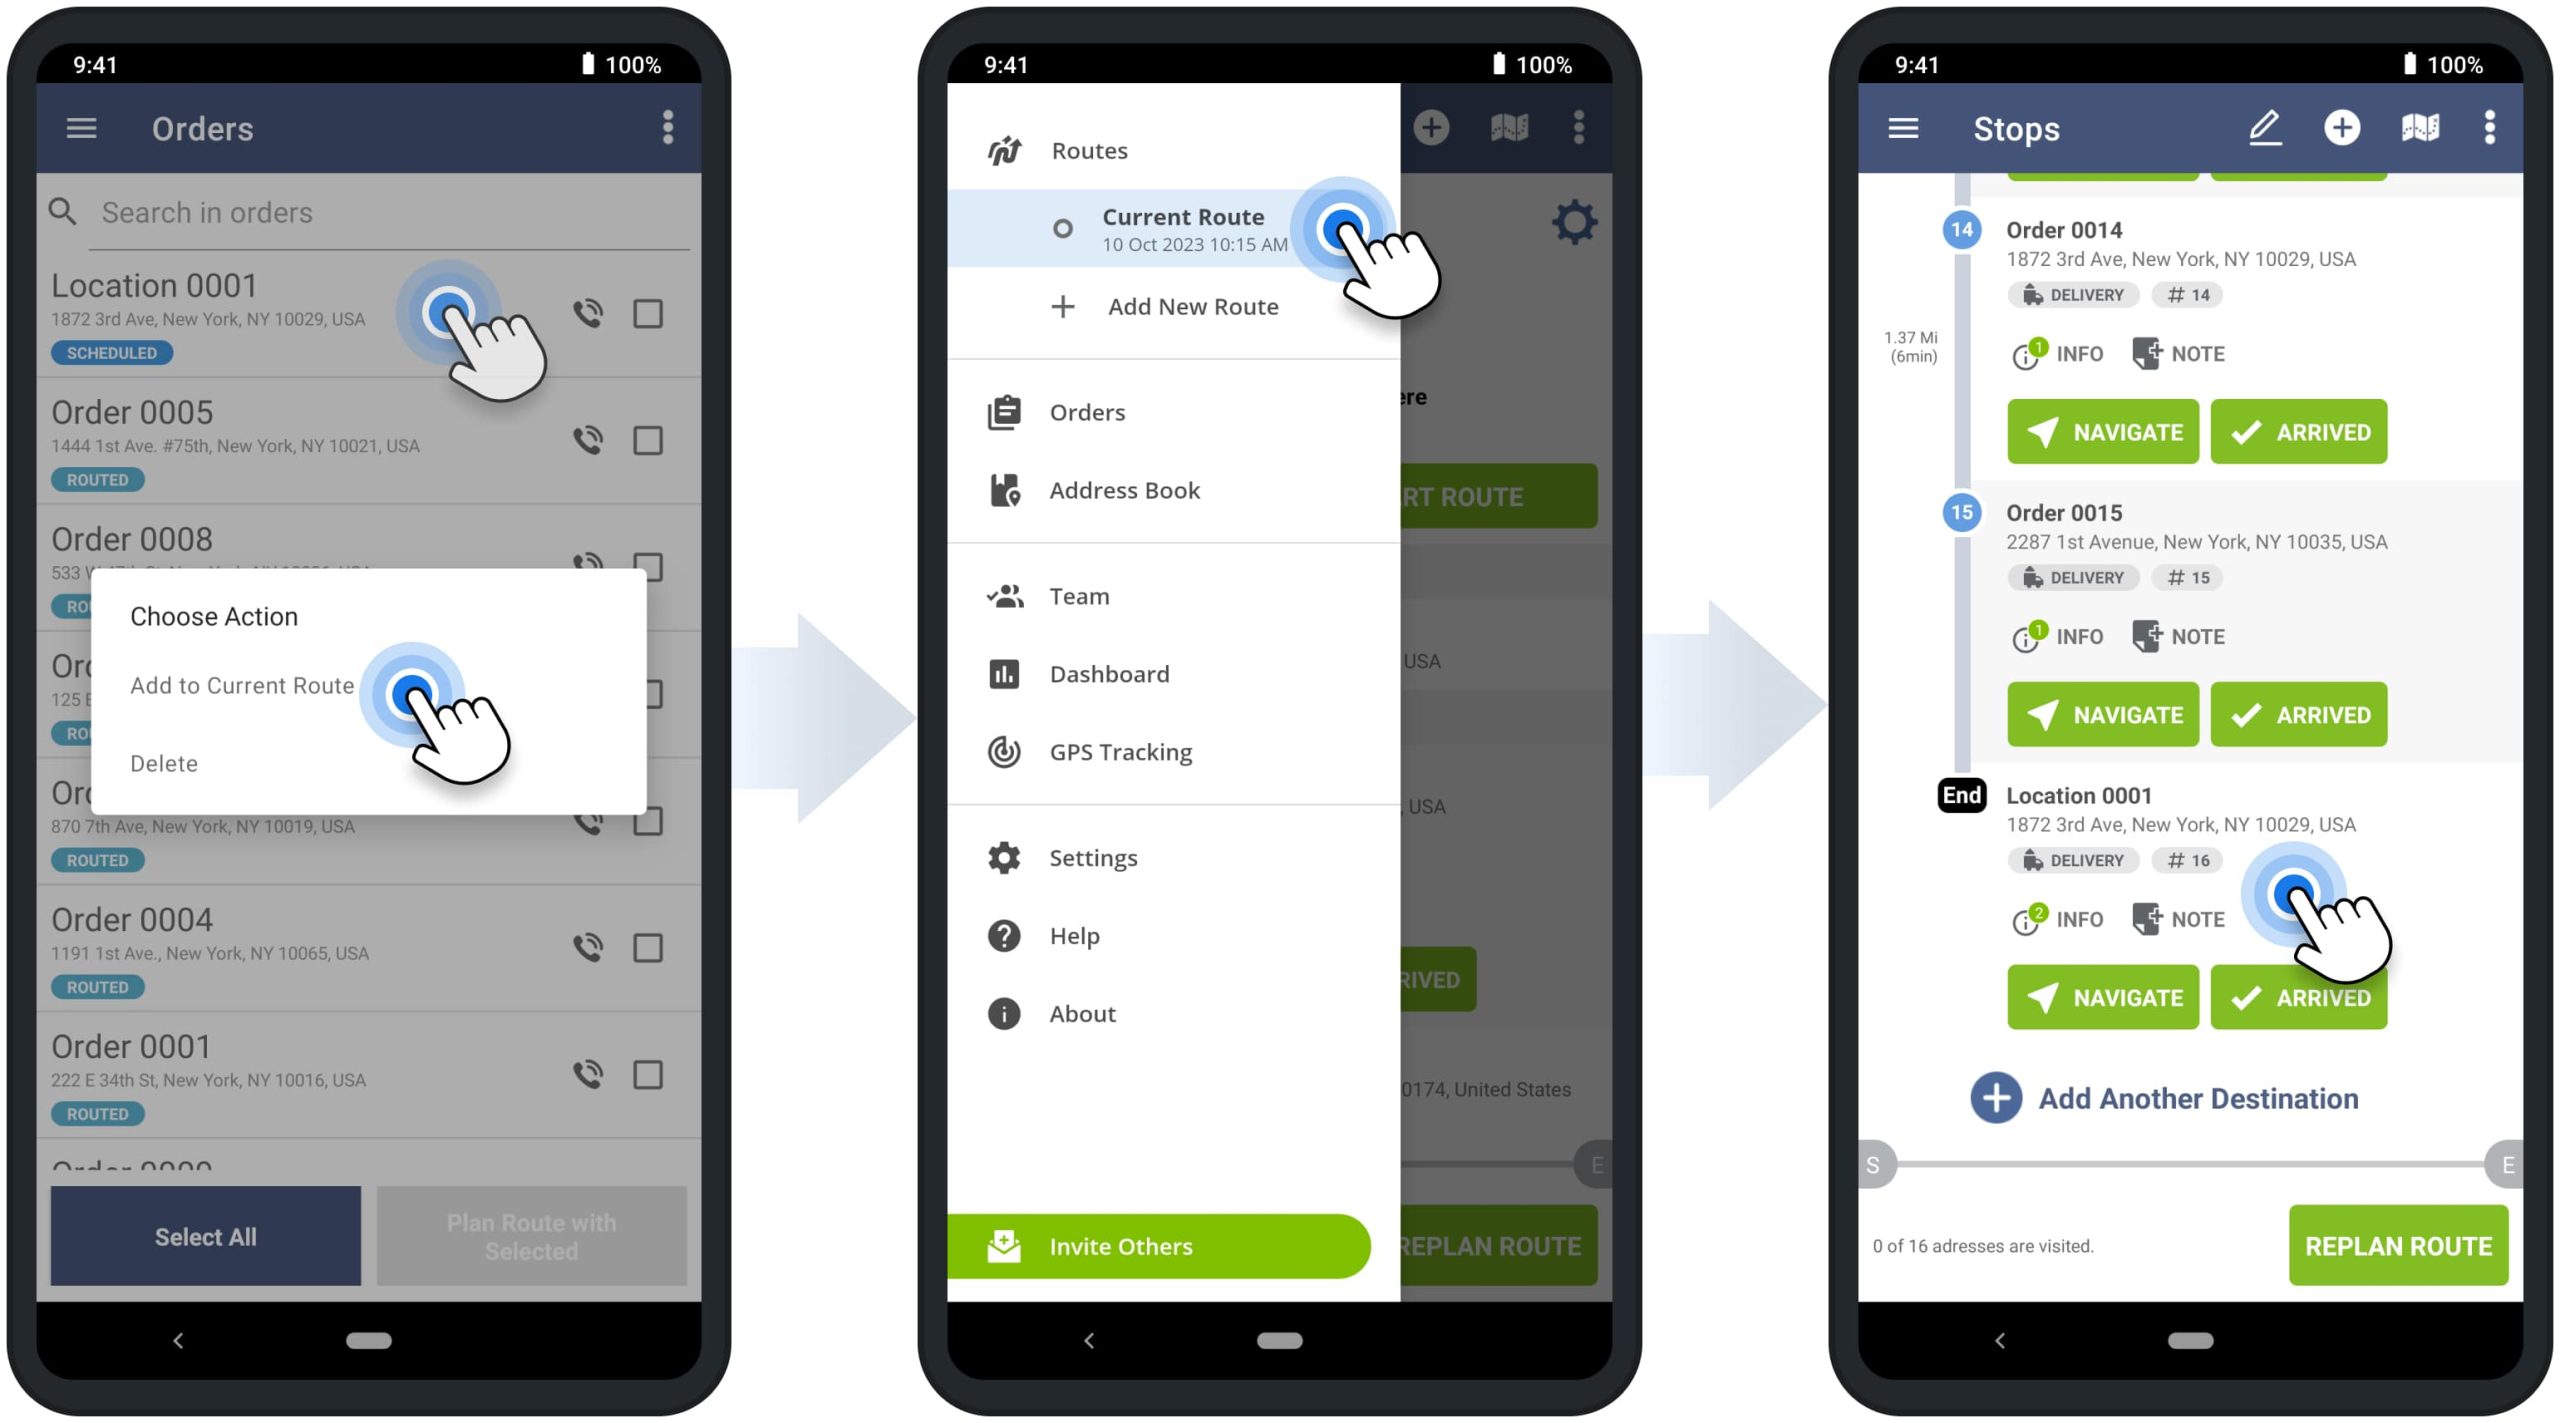 Insert orders into planned and optimized last-mile routes using Route4Me's Android Multi-Address Route Planning app.